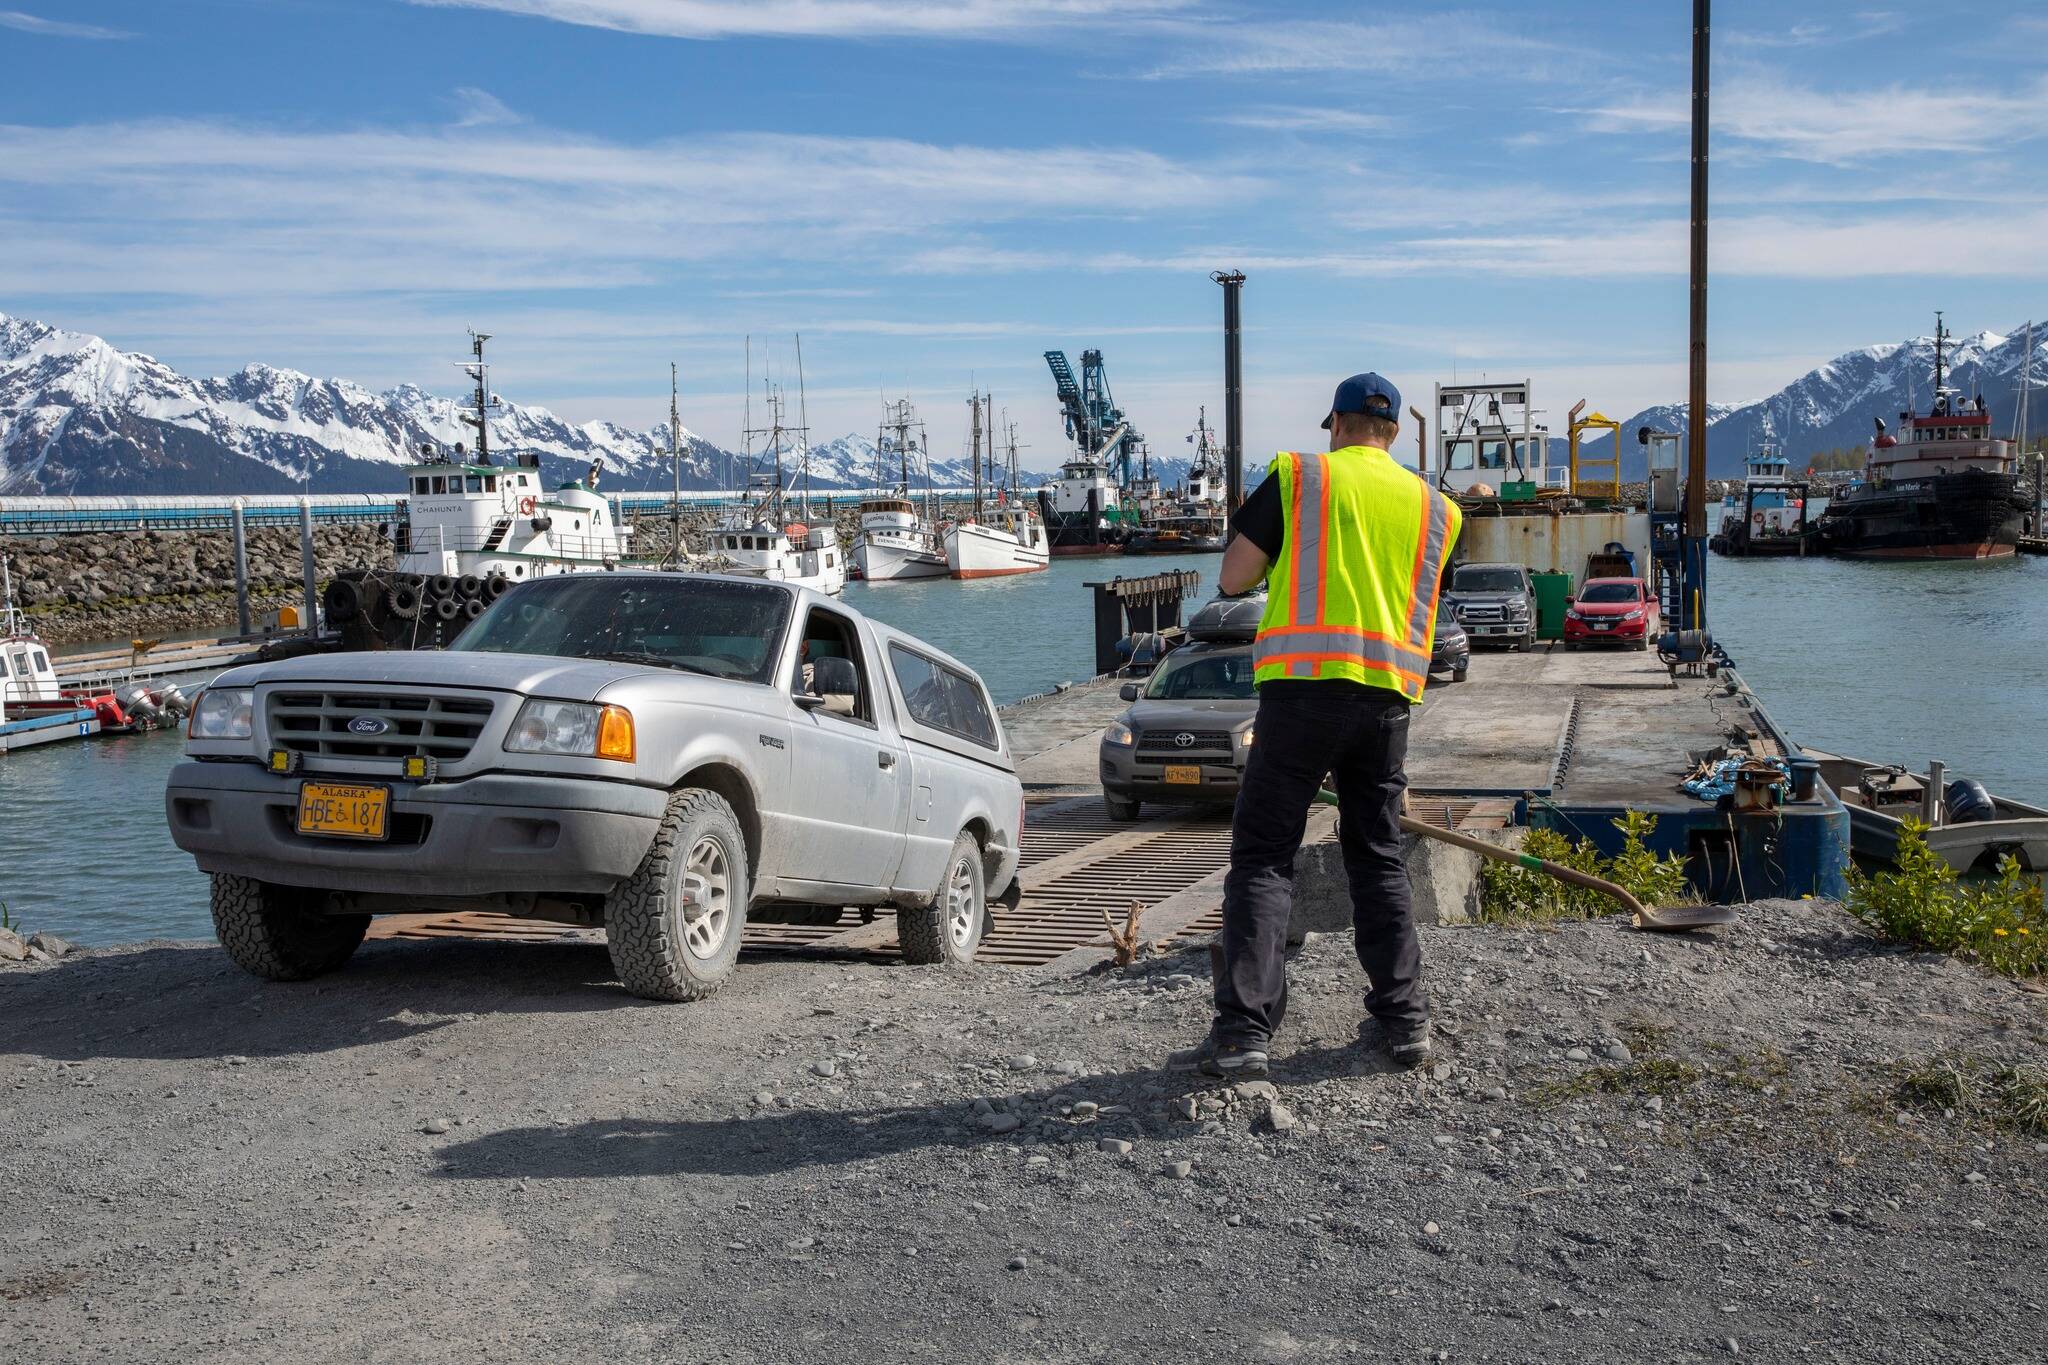 Vehicles are unleaded at the Seward Harbor after being moved from Lowell Point on Sunday, May 22, 2022 in Seward, Alaska. (Photo courtesy Kenai Peninsula Borough Office of Emergency Management)